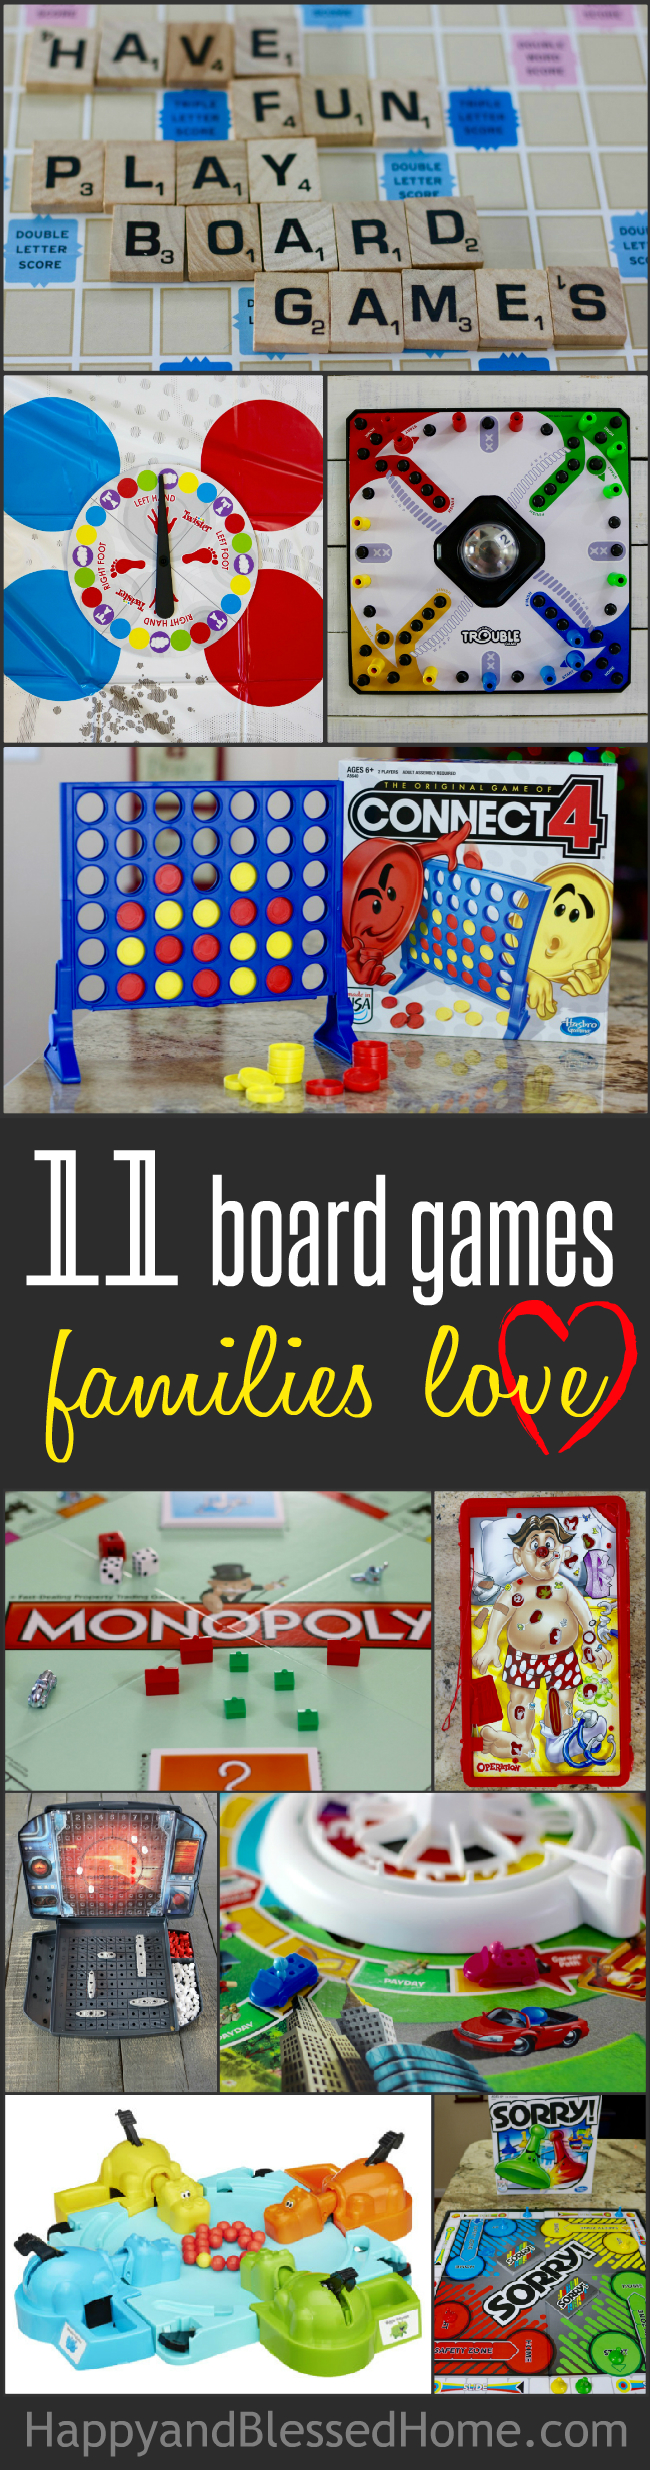 An awesome list of 11 board games families love - a fabulous list from HappyandBlessedHome.com